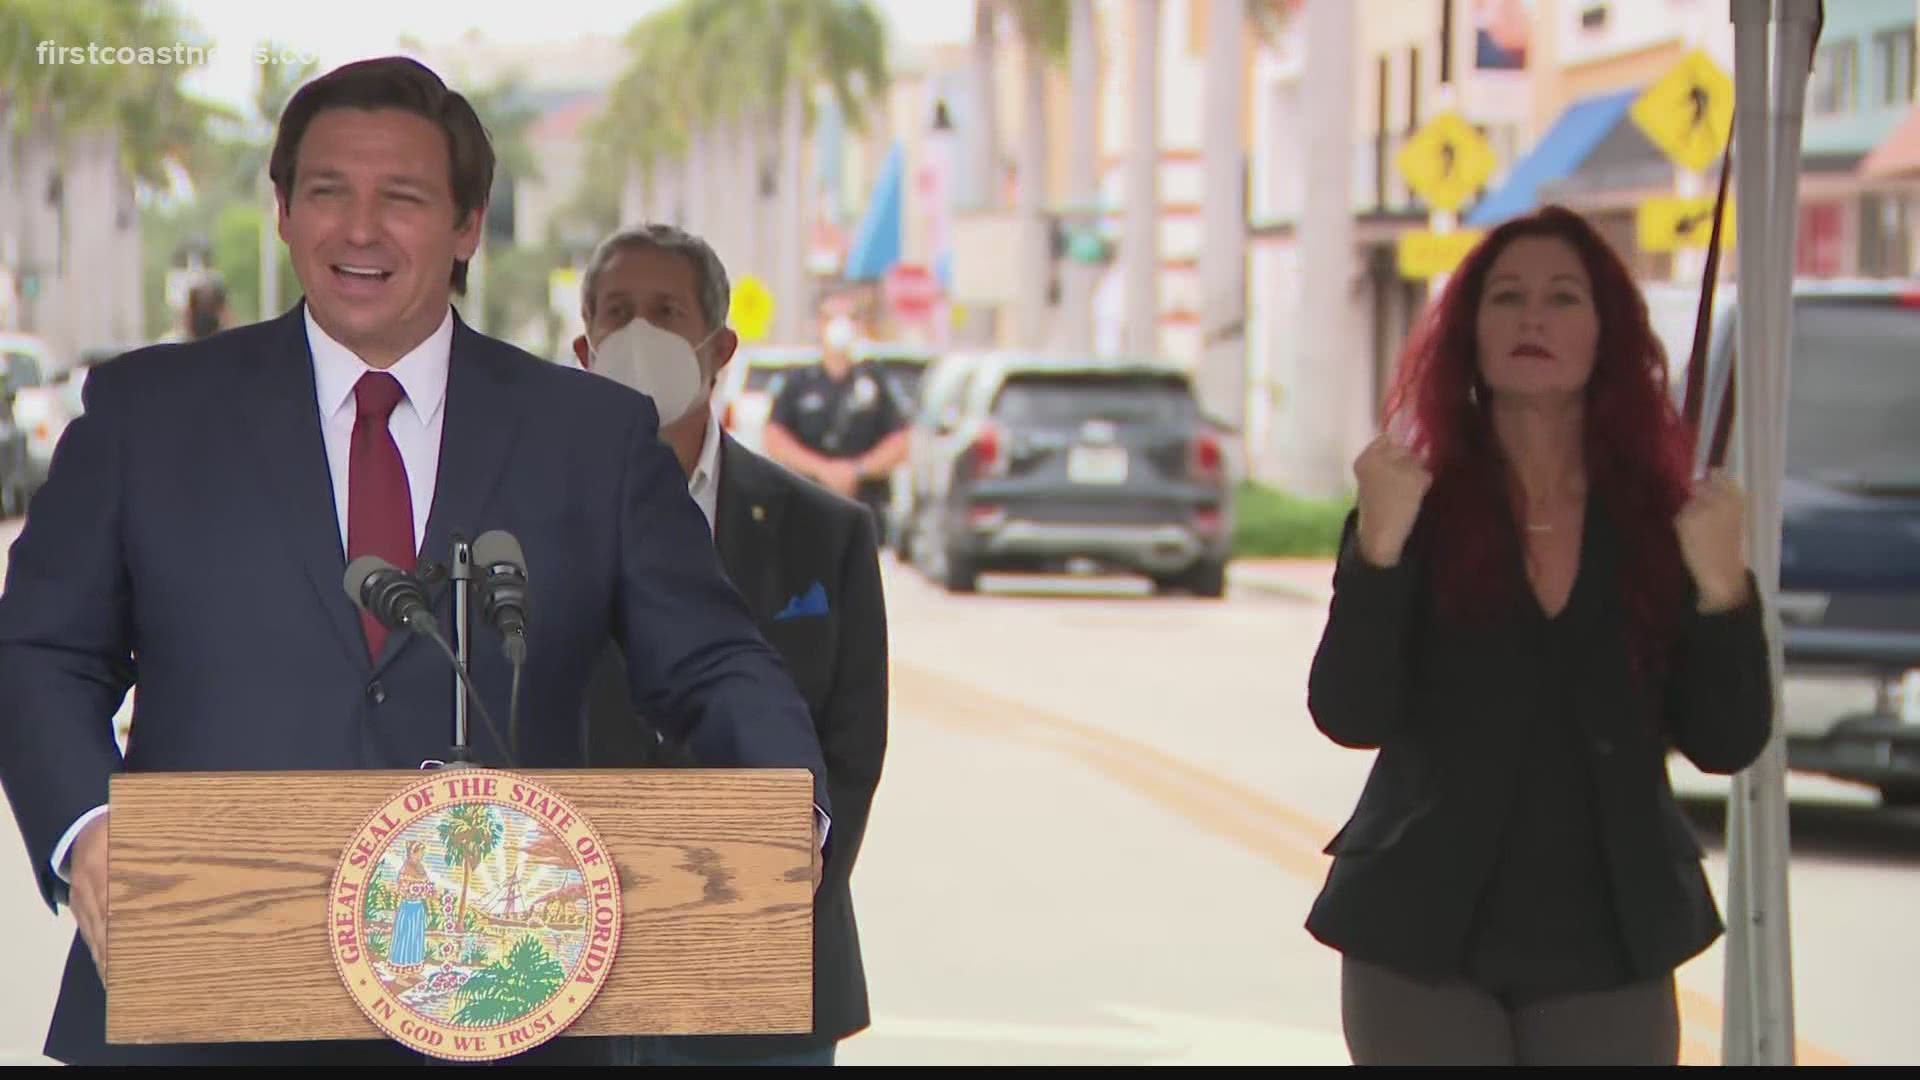 DeSantis said that he will be in Jacksonville to make the announcement, though did not provide a time.